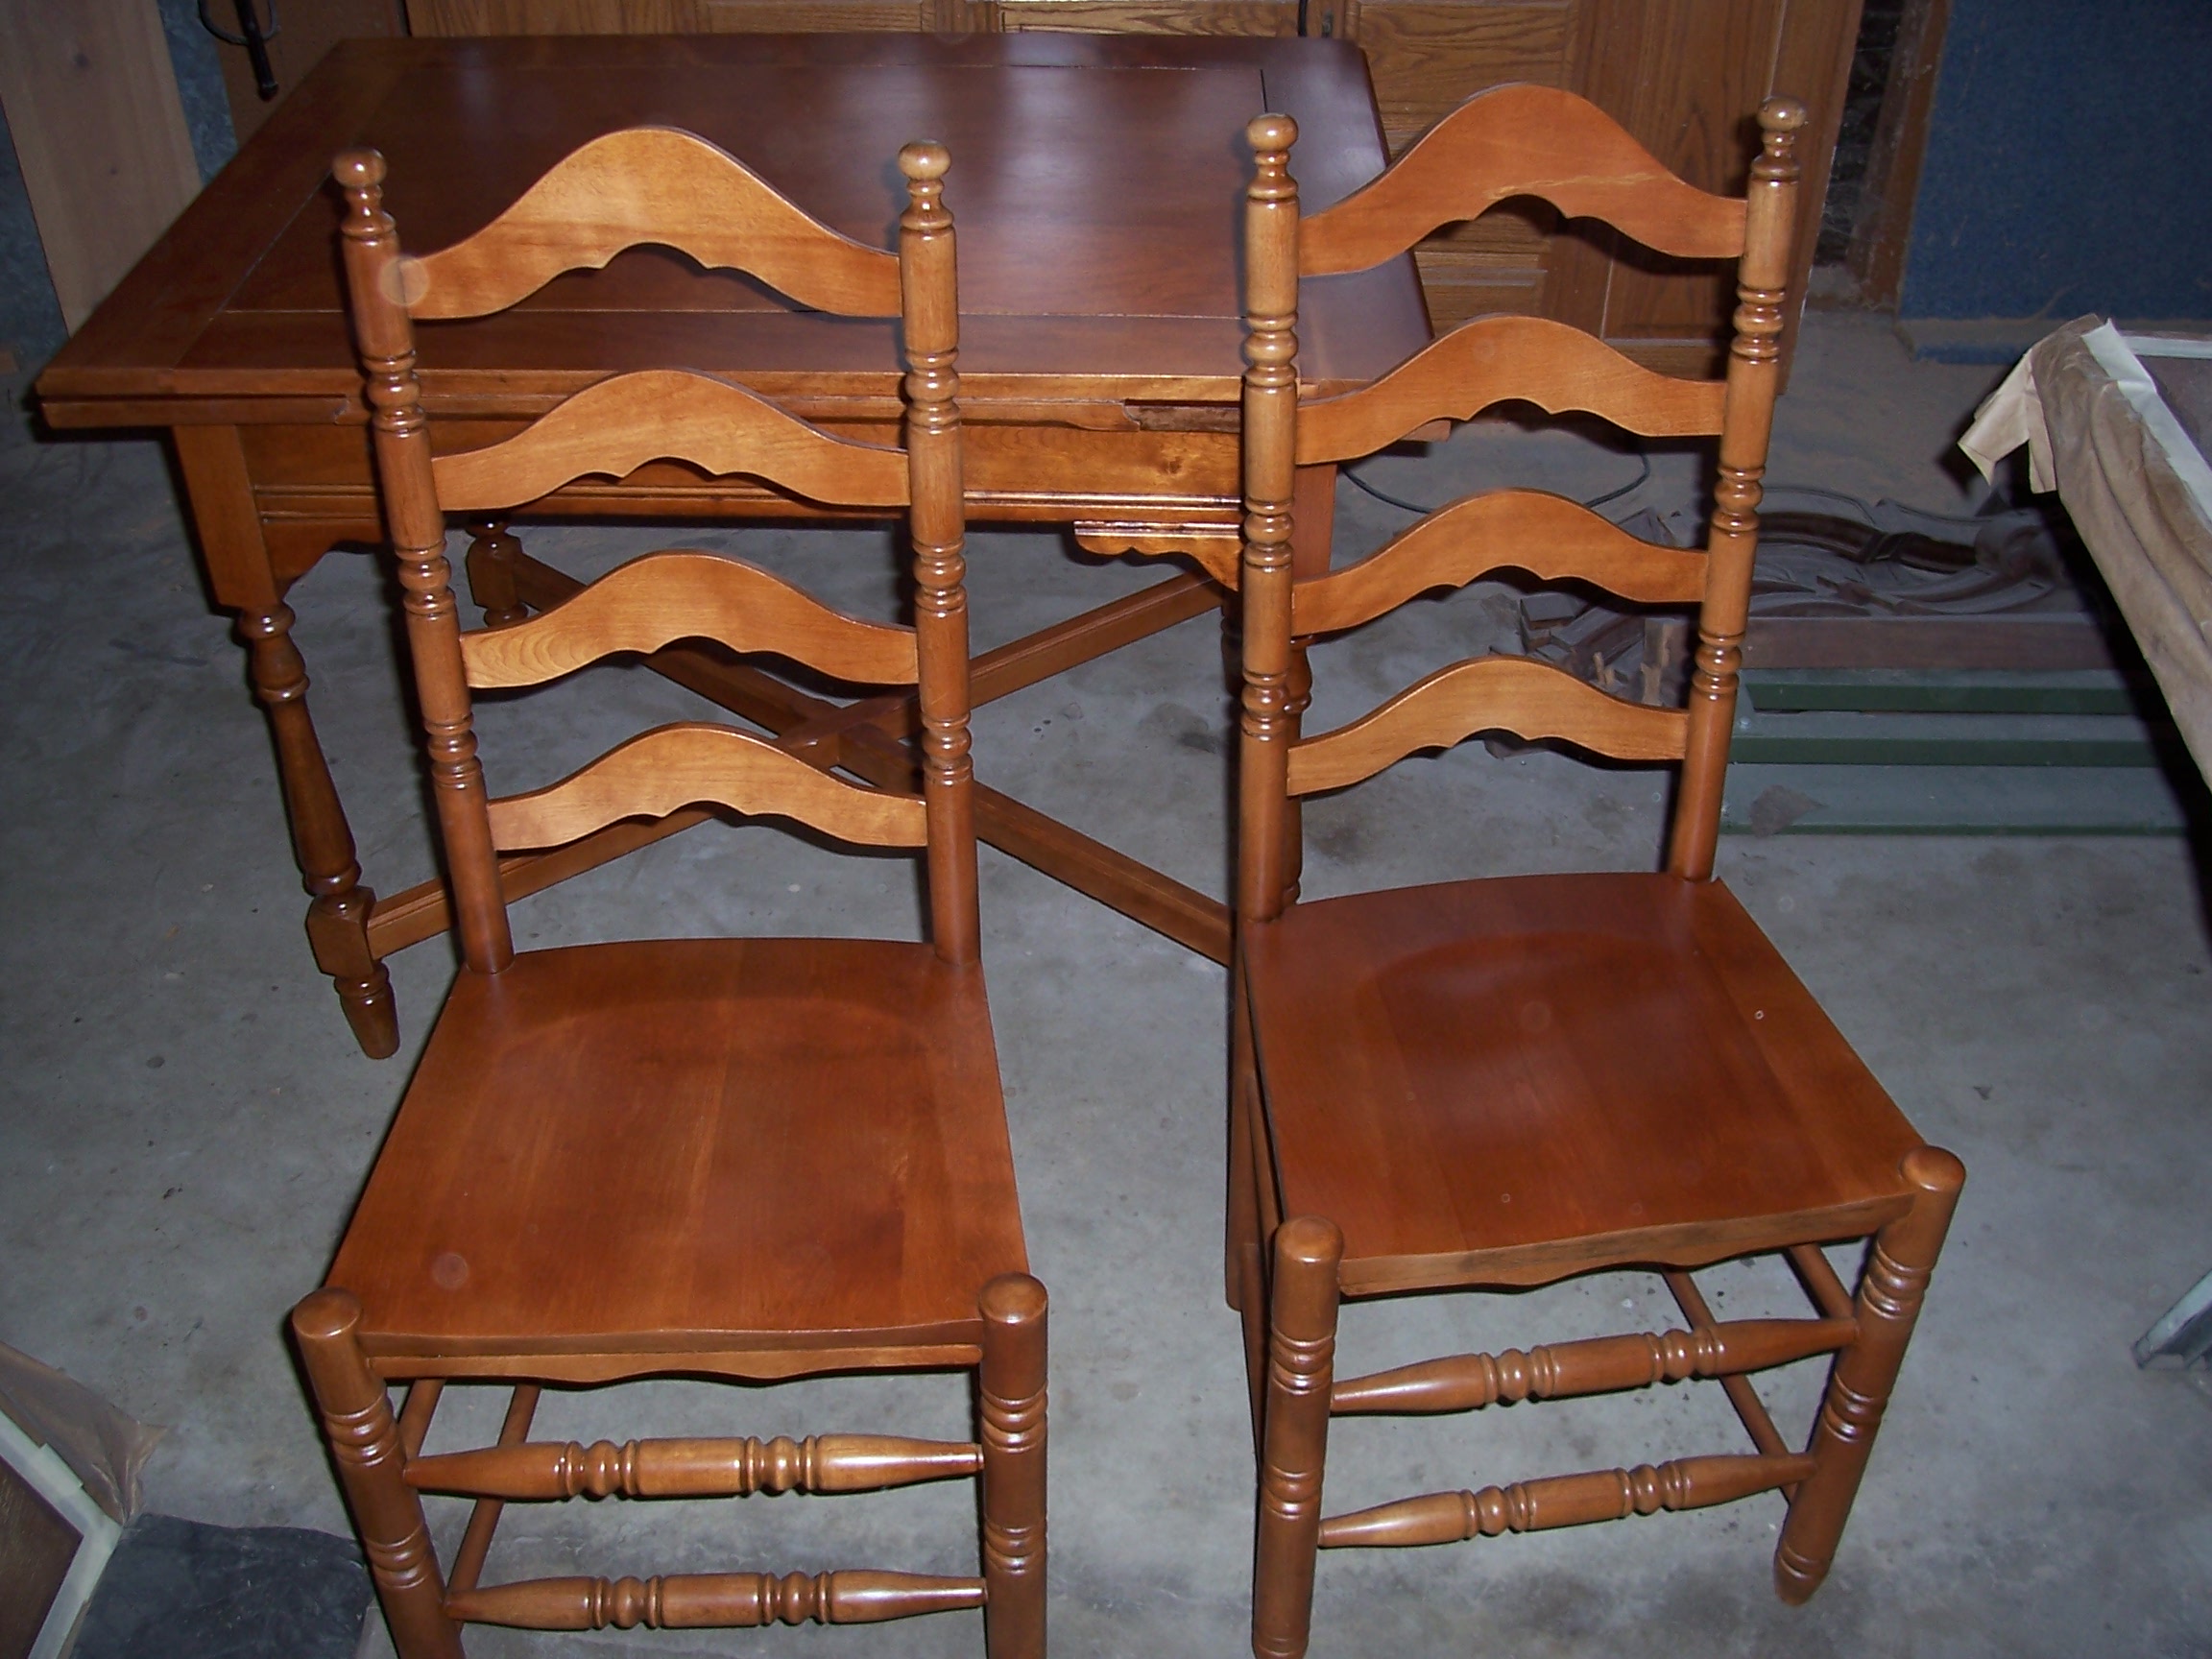 Antique maple table & chairs